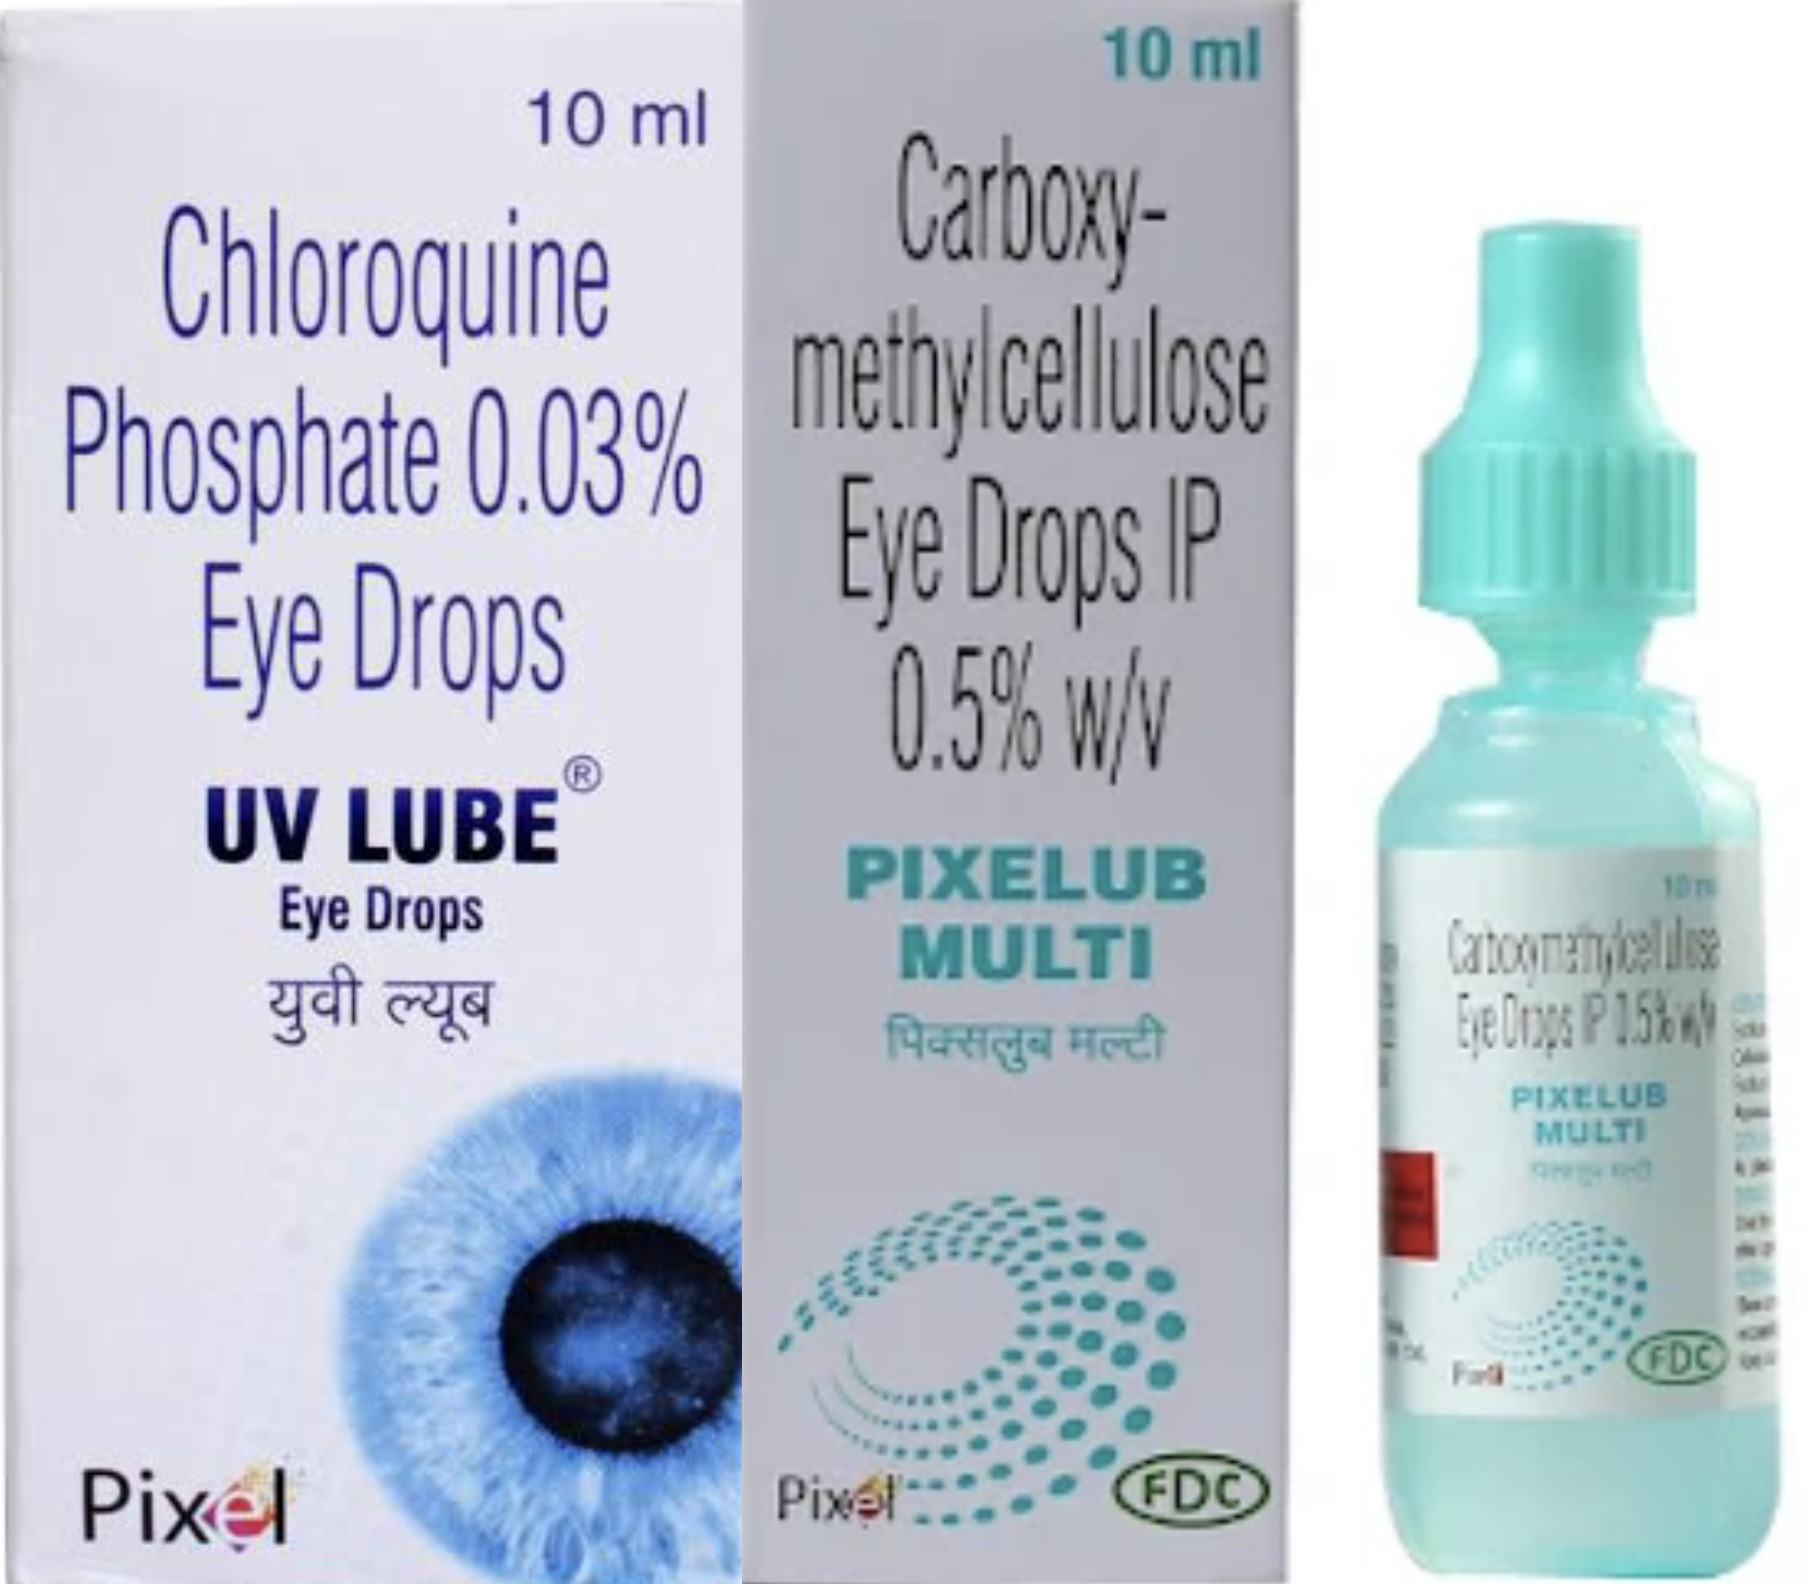 Pixelub and UV Lube: Effective Treatment Options for Dry Eye Syndrome and Post-LASIK Dryness